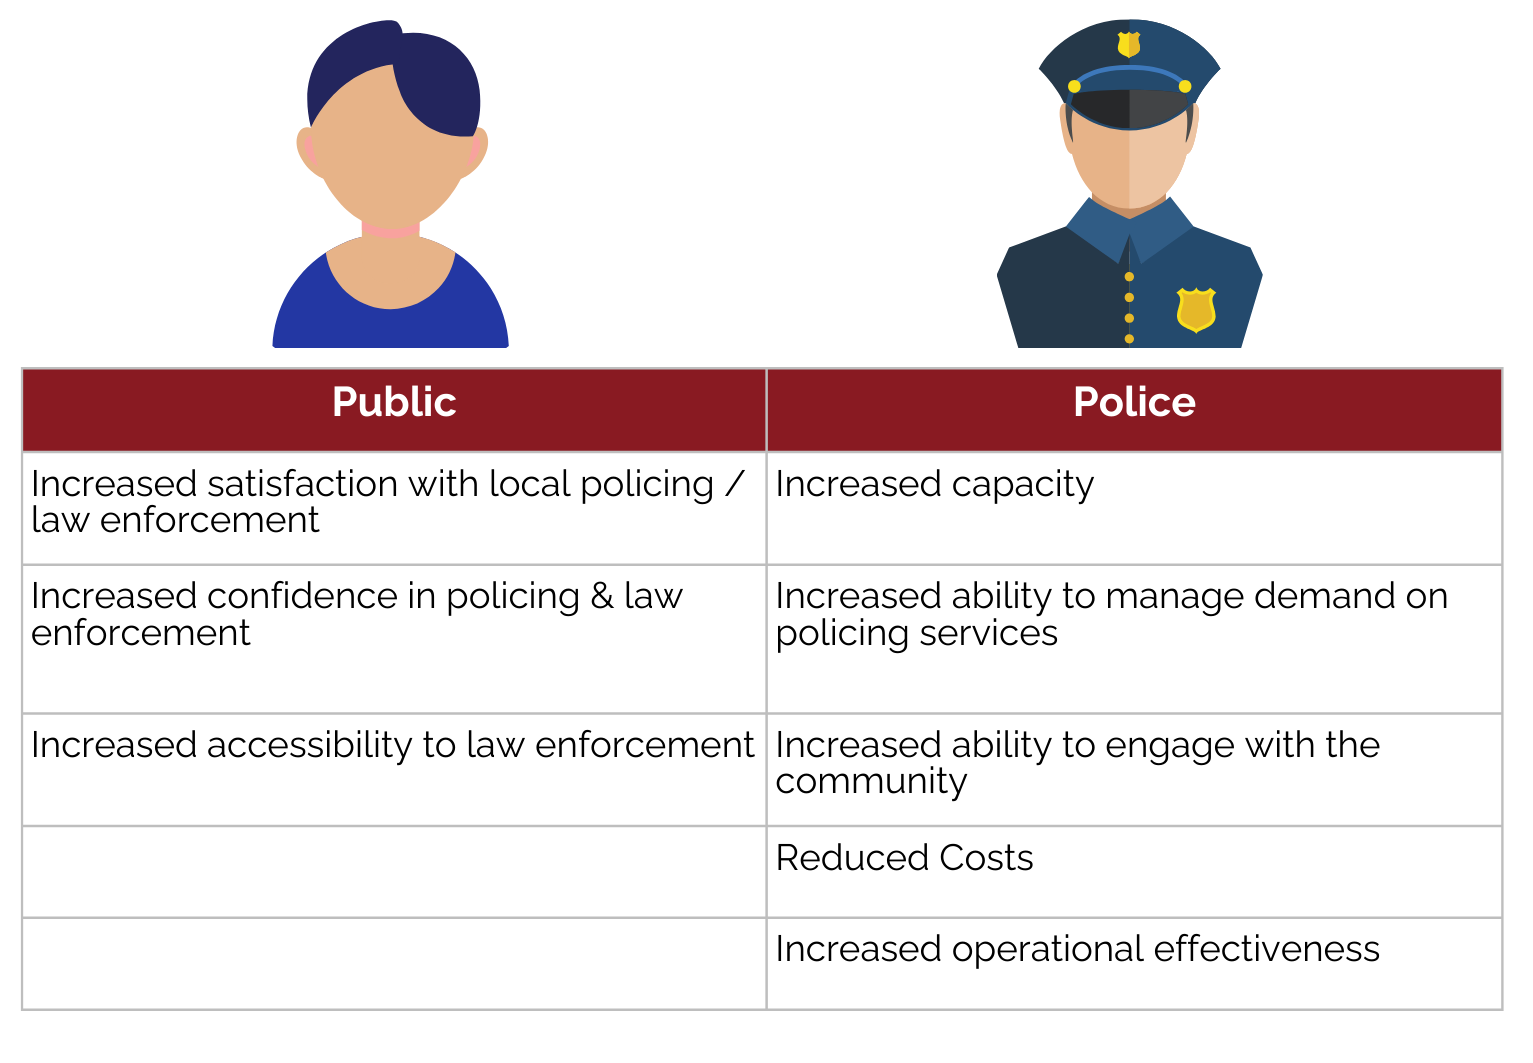 Increased confidence in policing & law enforcement